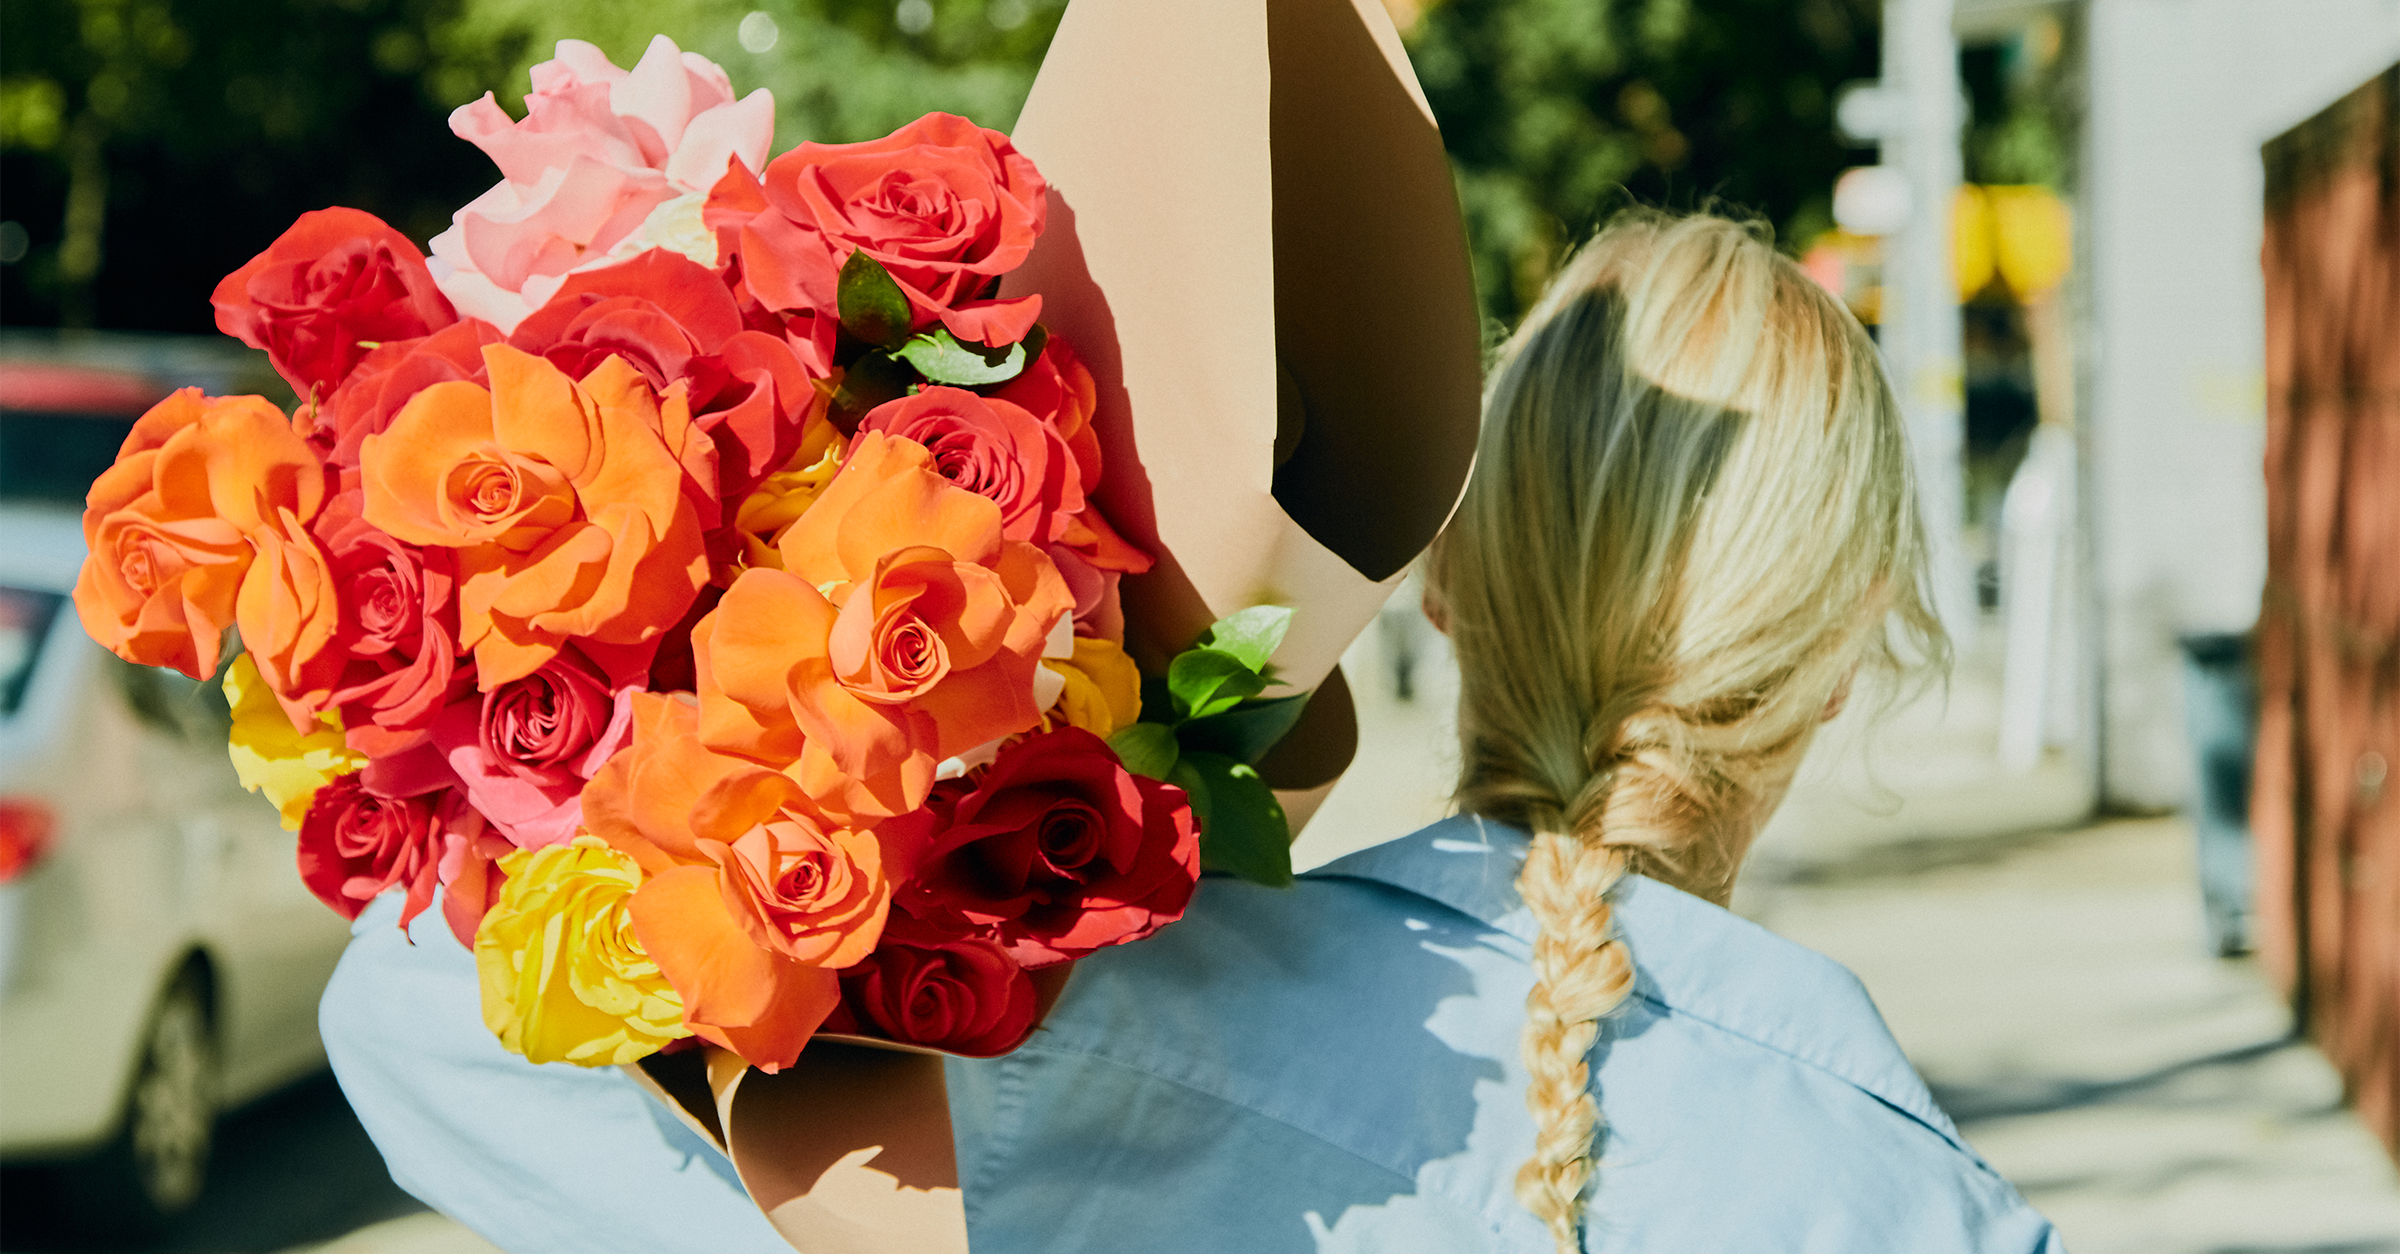 Roses Delivery: Send Rose Bouquets | Proflowers